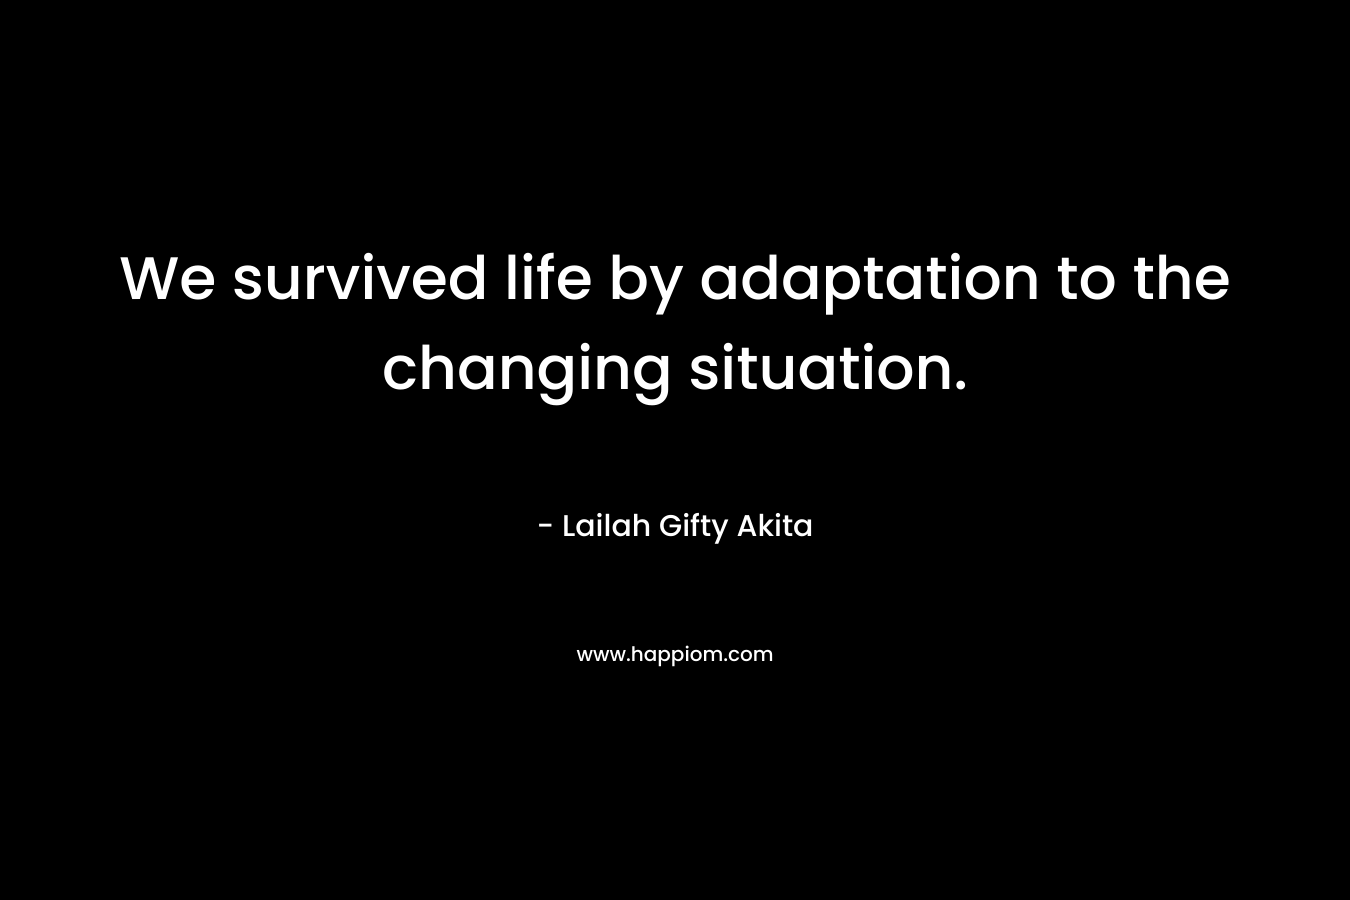 We survived life by adaptation to the changing situation.